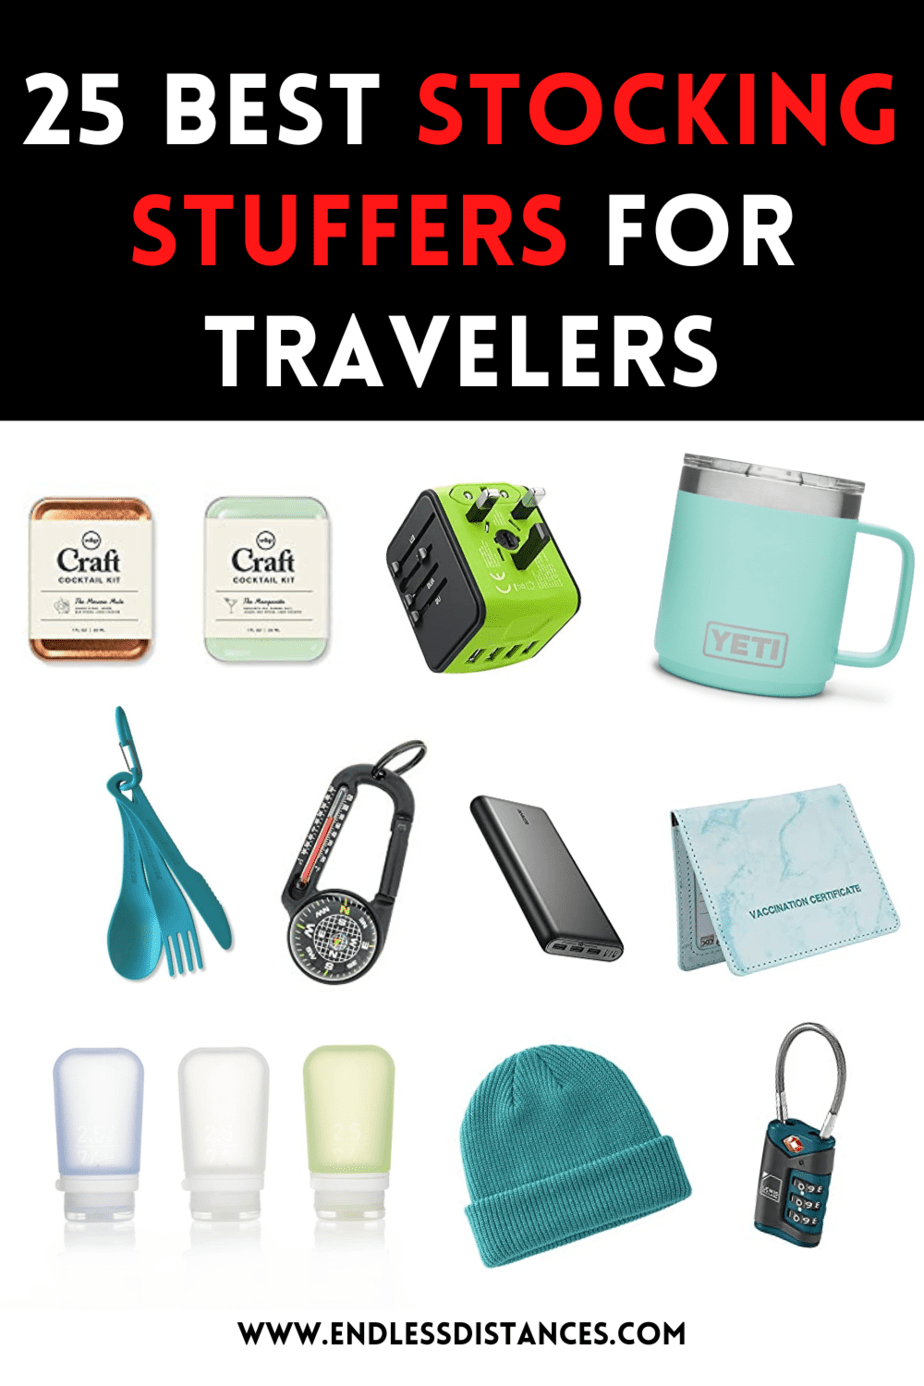 50 Unique Stocking Stuffers for Men - From Under a Palm Tree